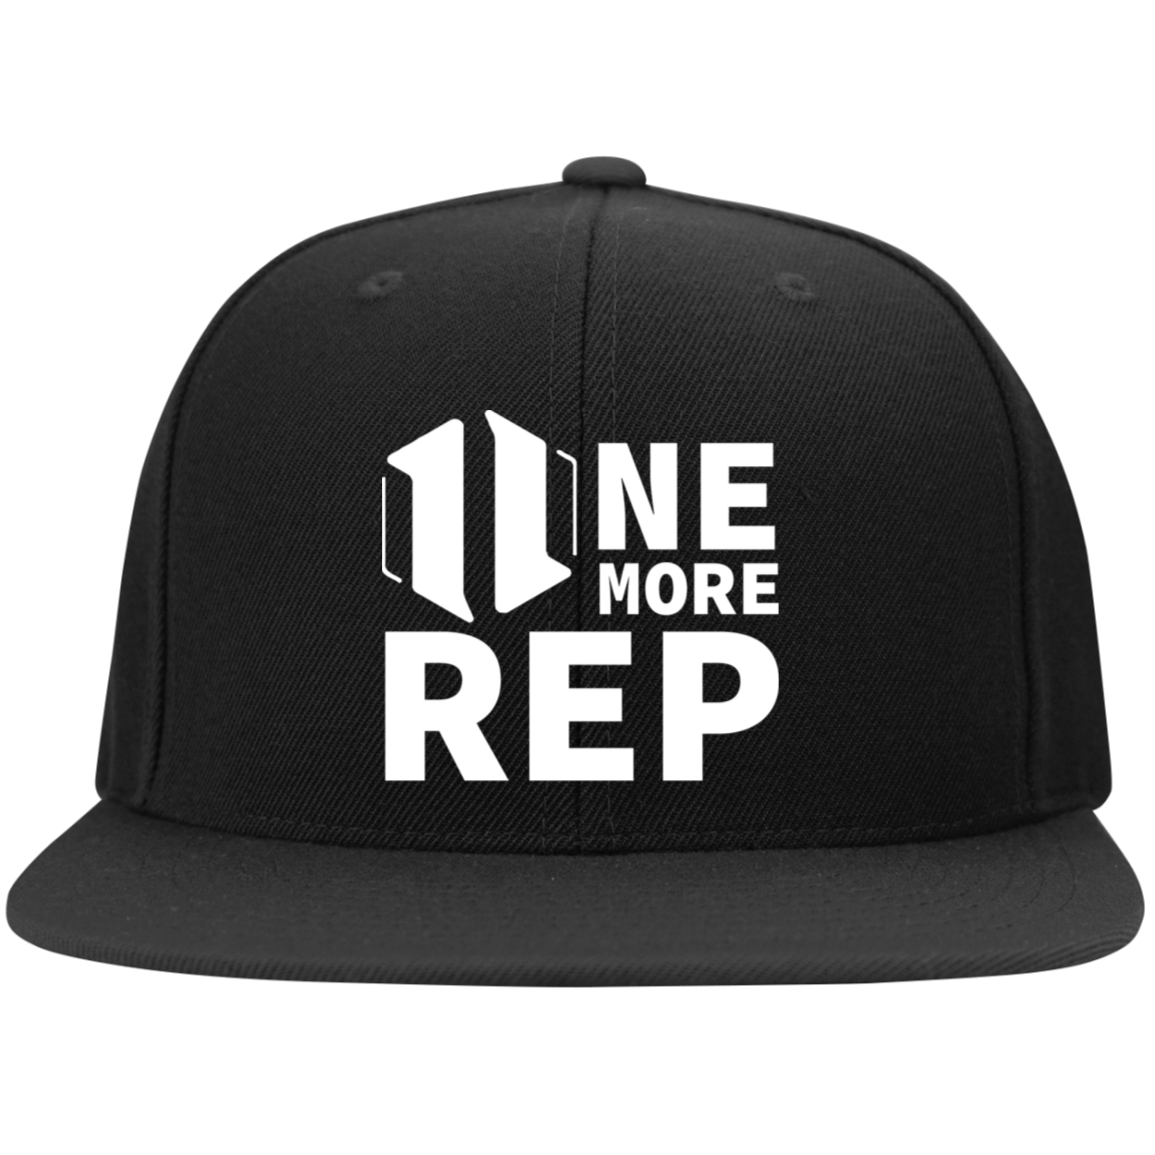 ONE MORE REP  Snapback Hat 3